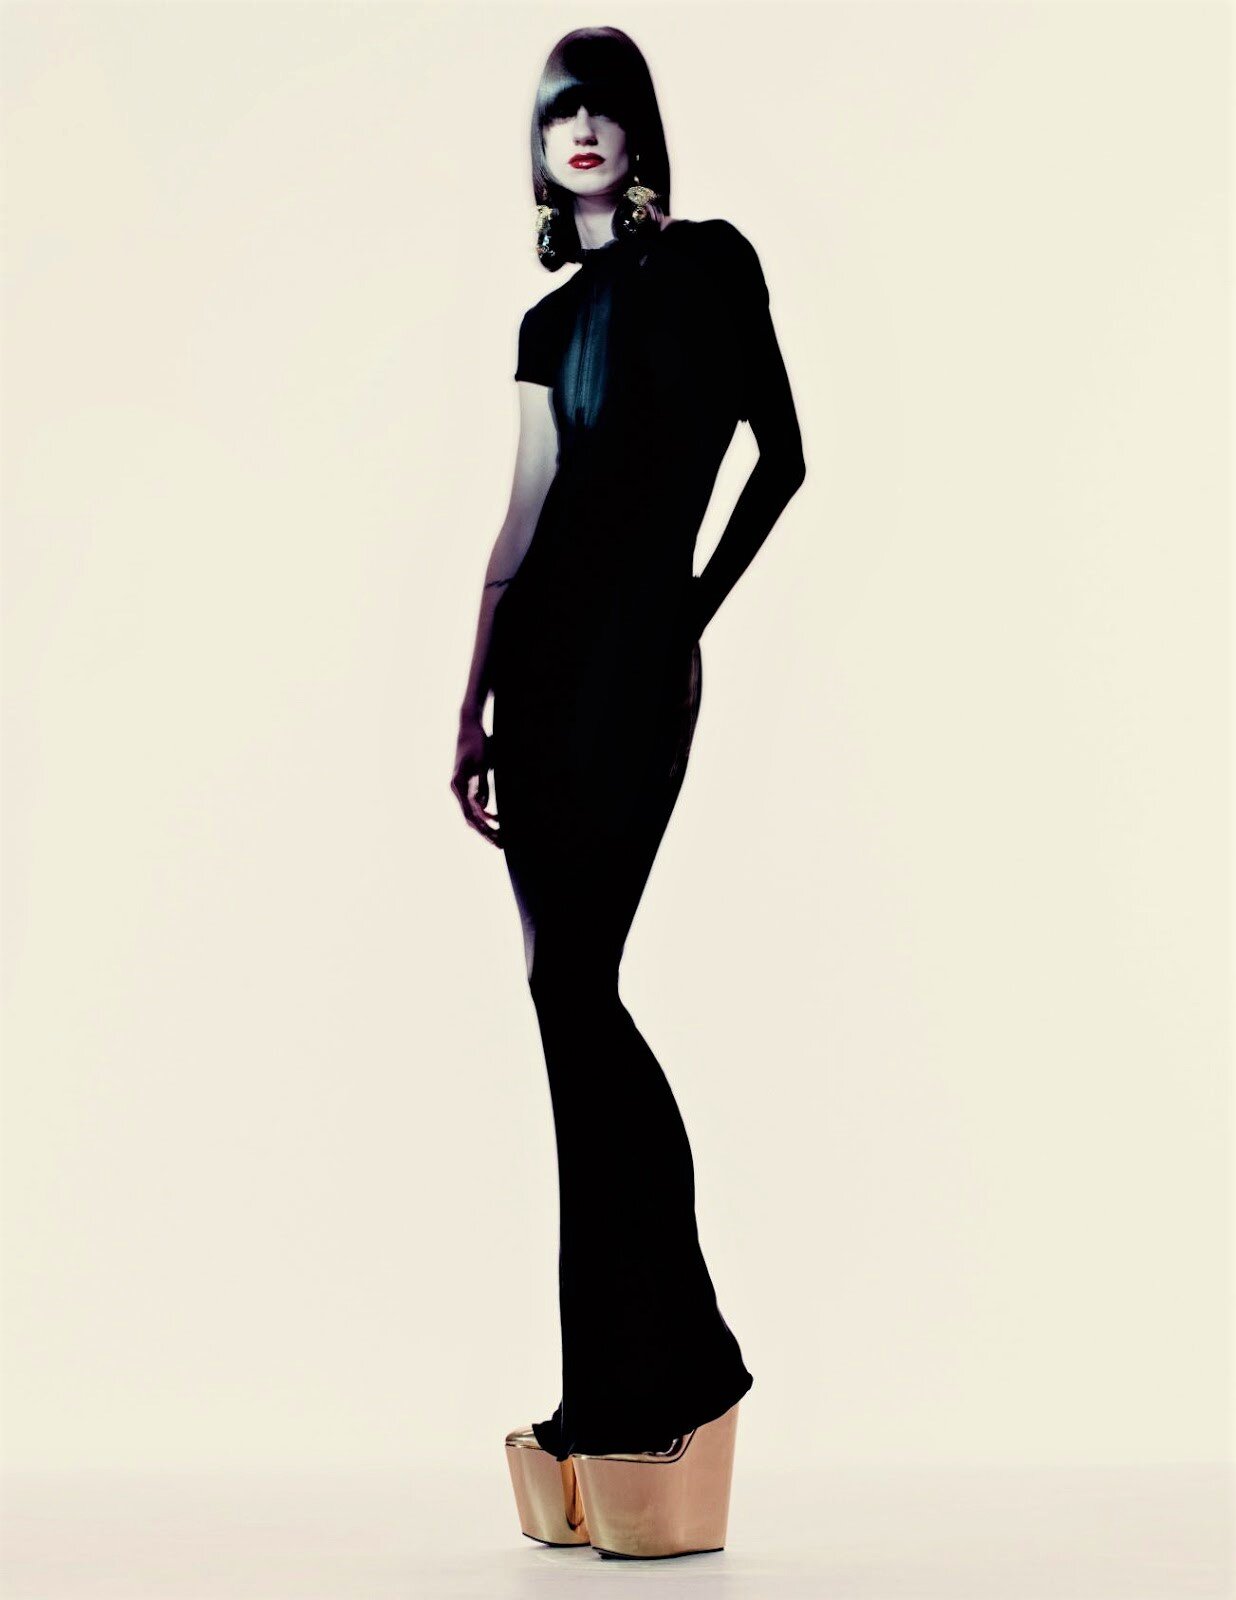 Paolo Roversi Divine Couture Vogue Paris May 2021 (4).jpg